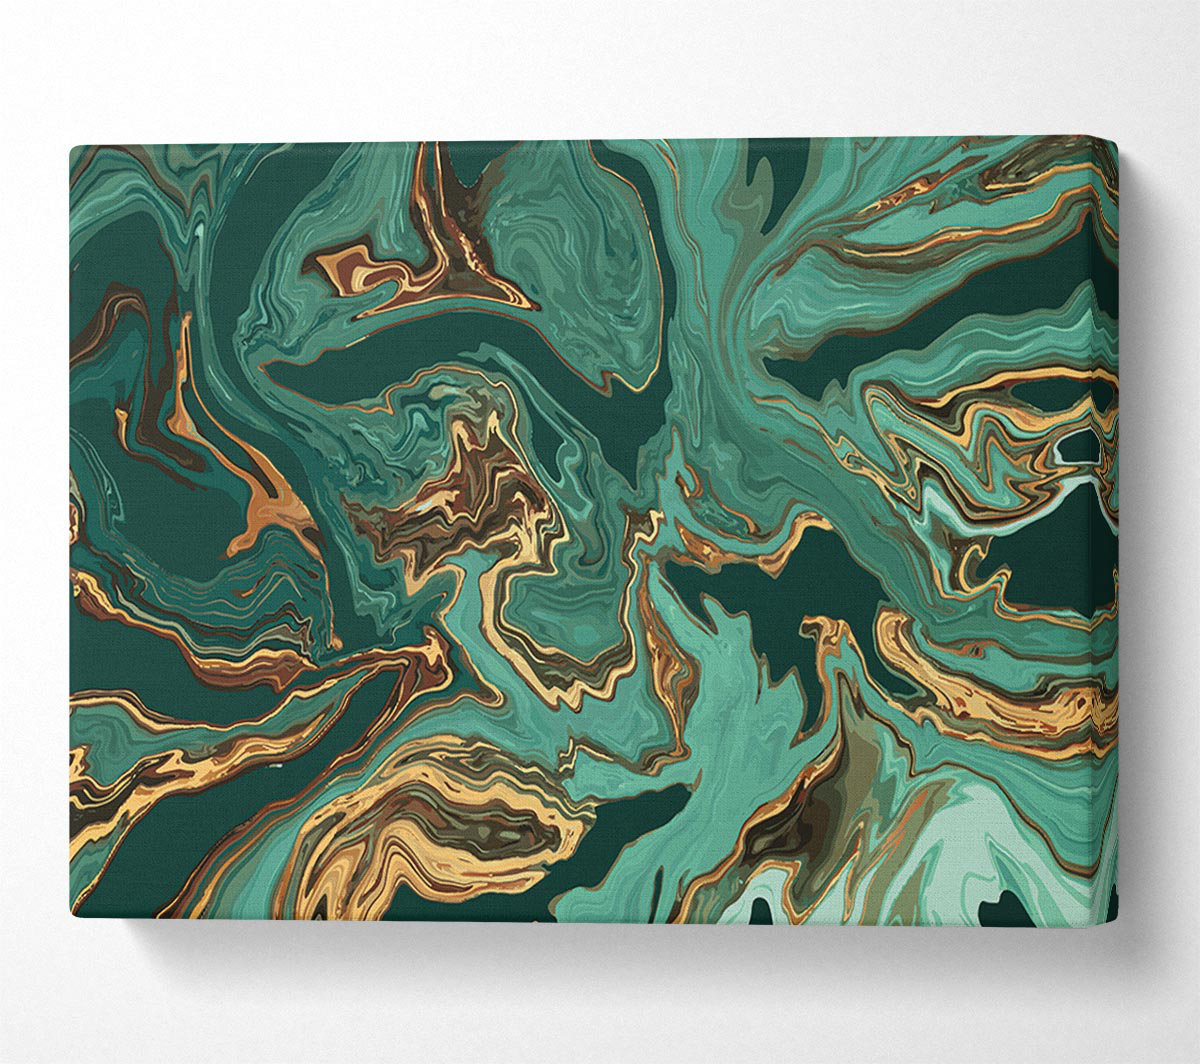 Green Fold To Gold - Wrapped Canvas Graphic Art